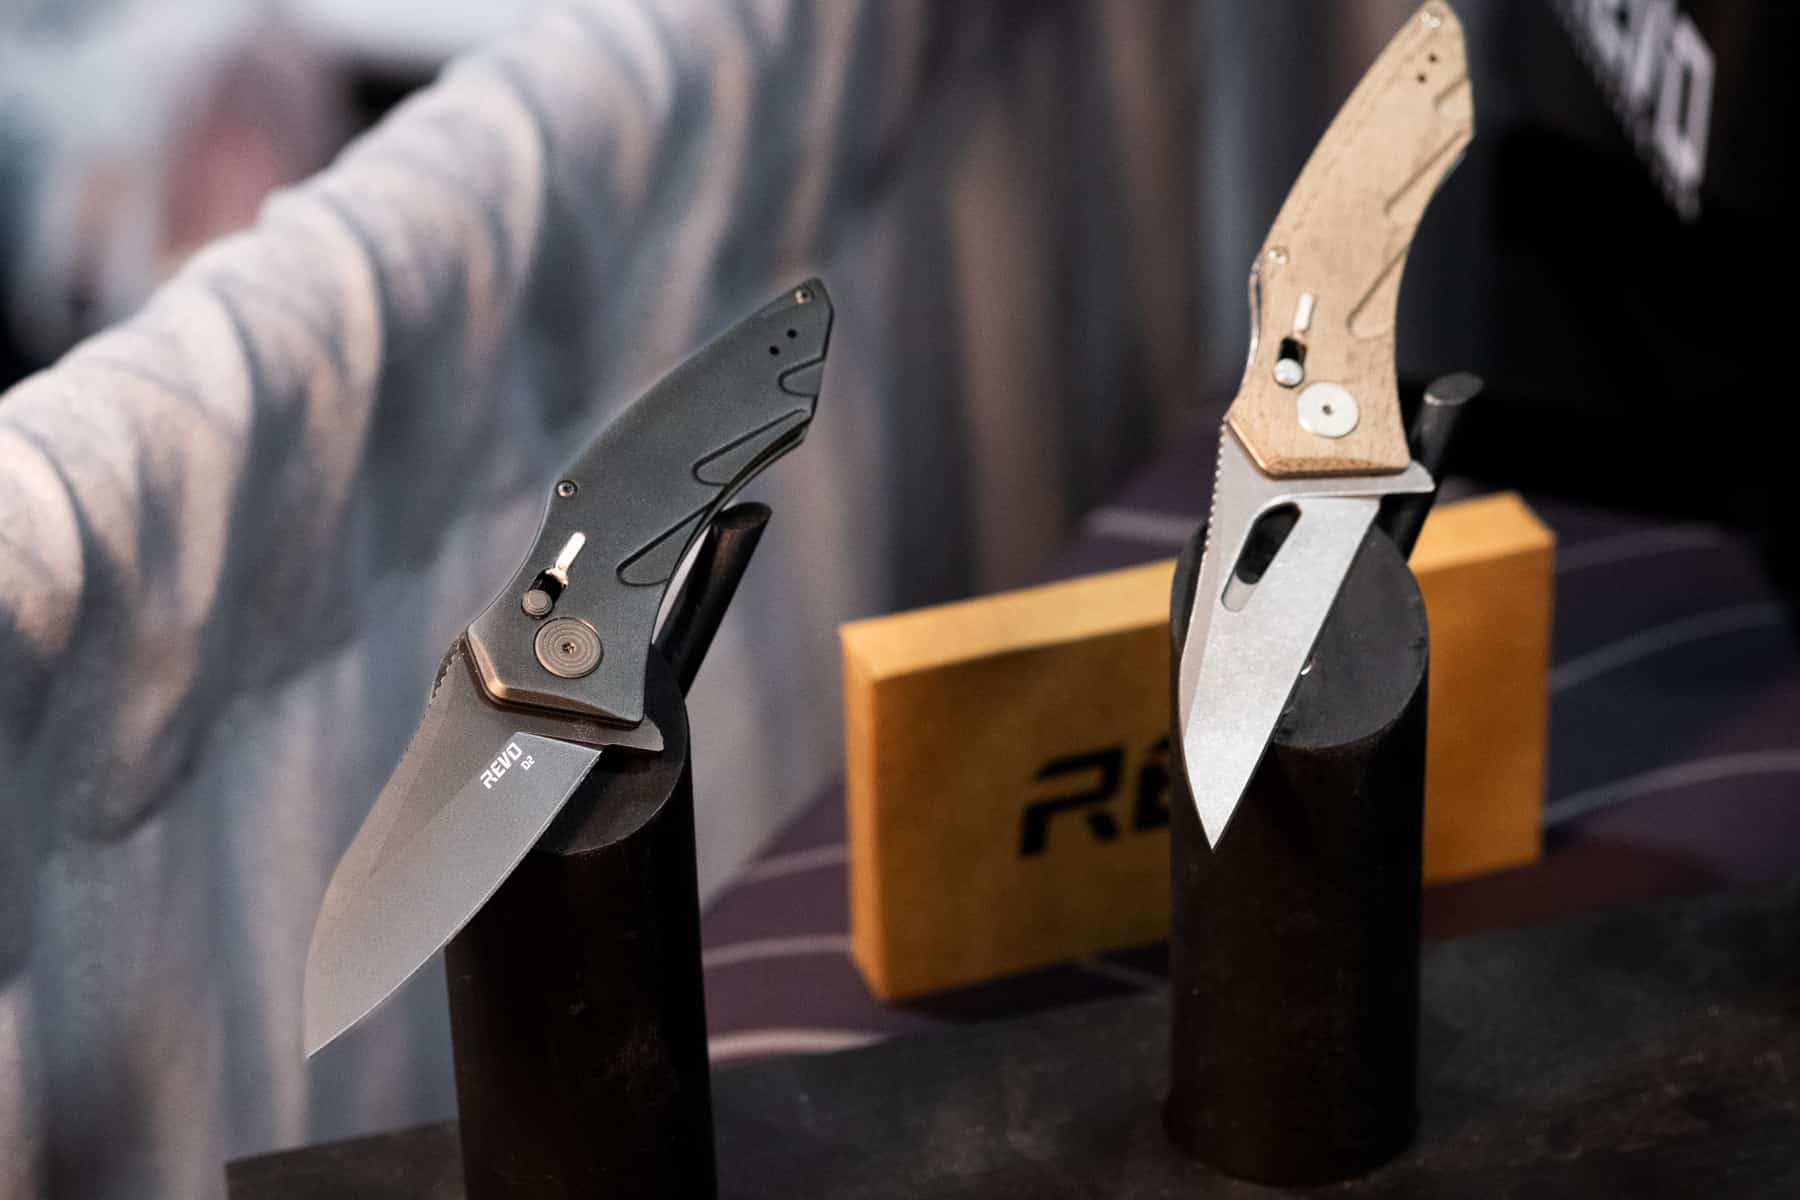 The Revo Storm will be available with G10 or Micarta handle scales. 